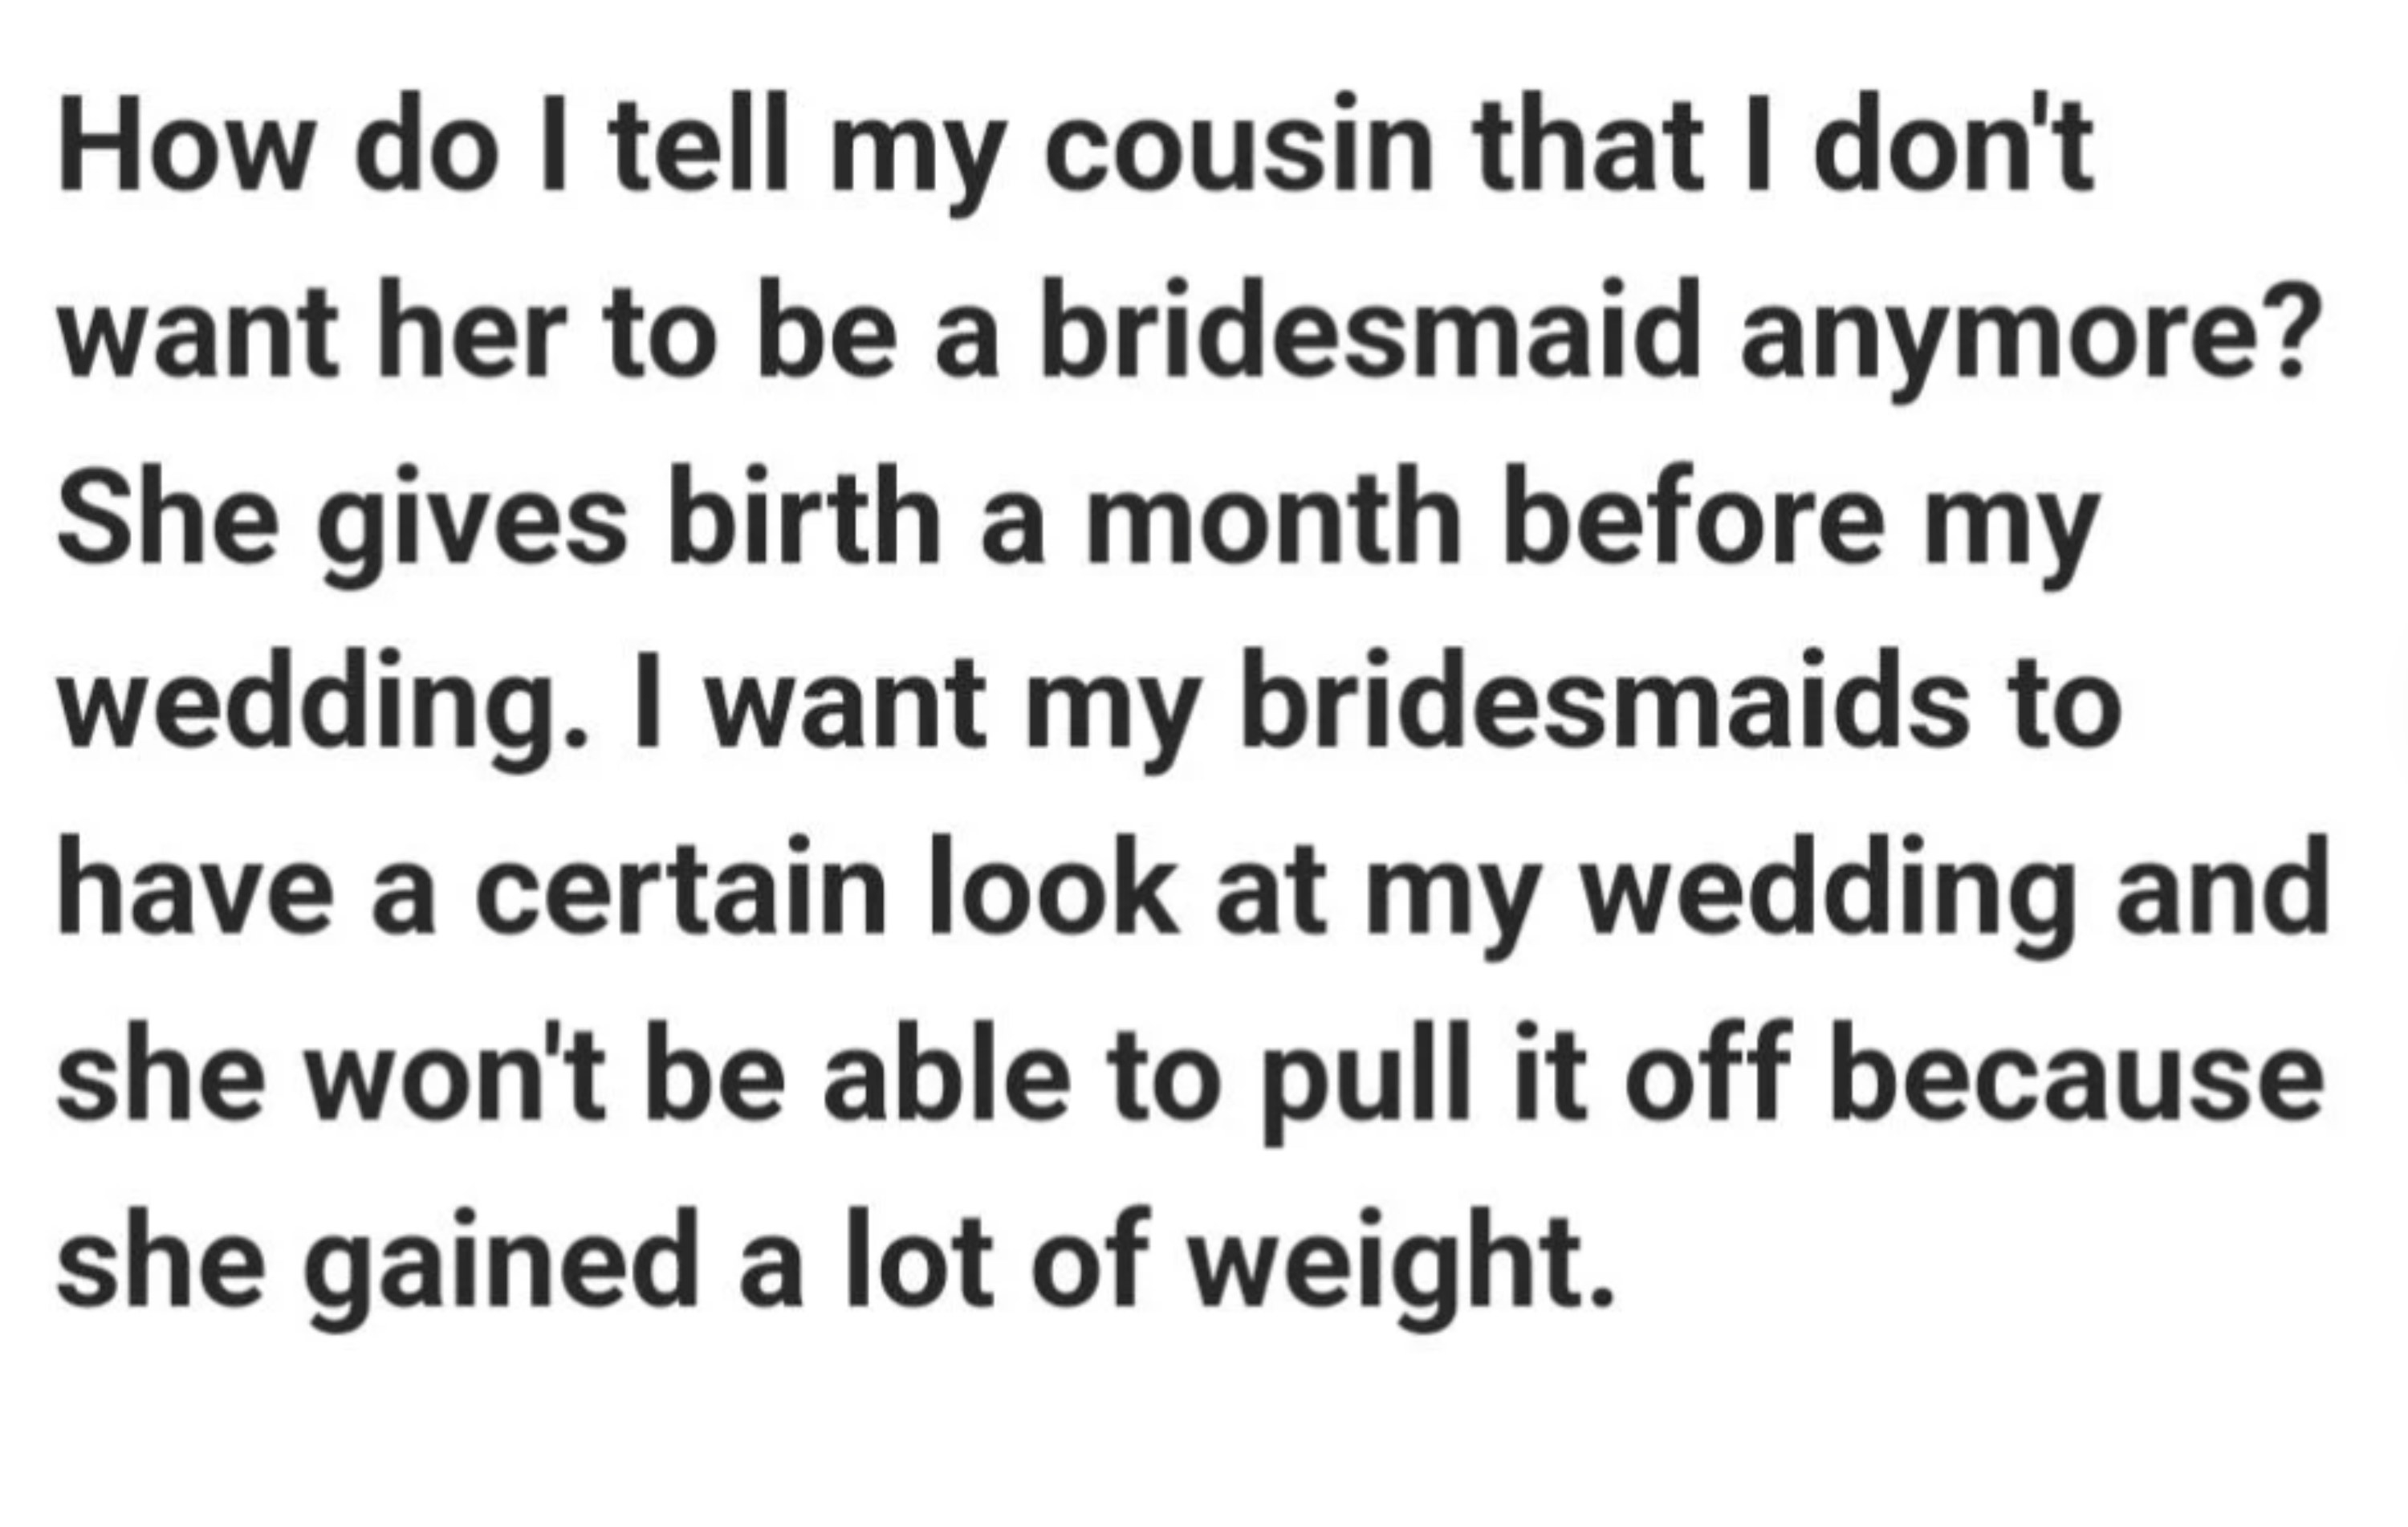 &quot;How do I tell my cousin that I don&#x27;t want her to be a bridesmaid anymore?&quot;